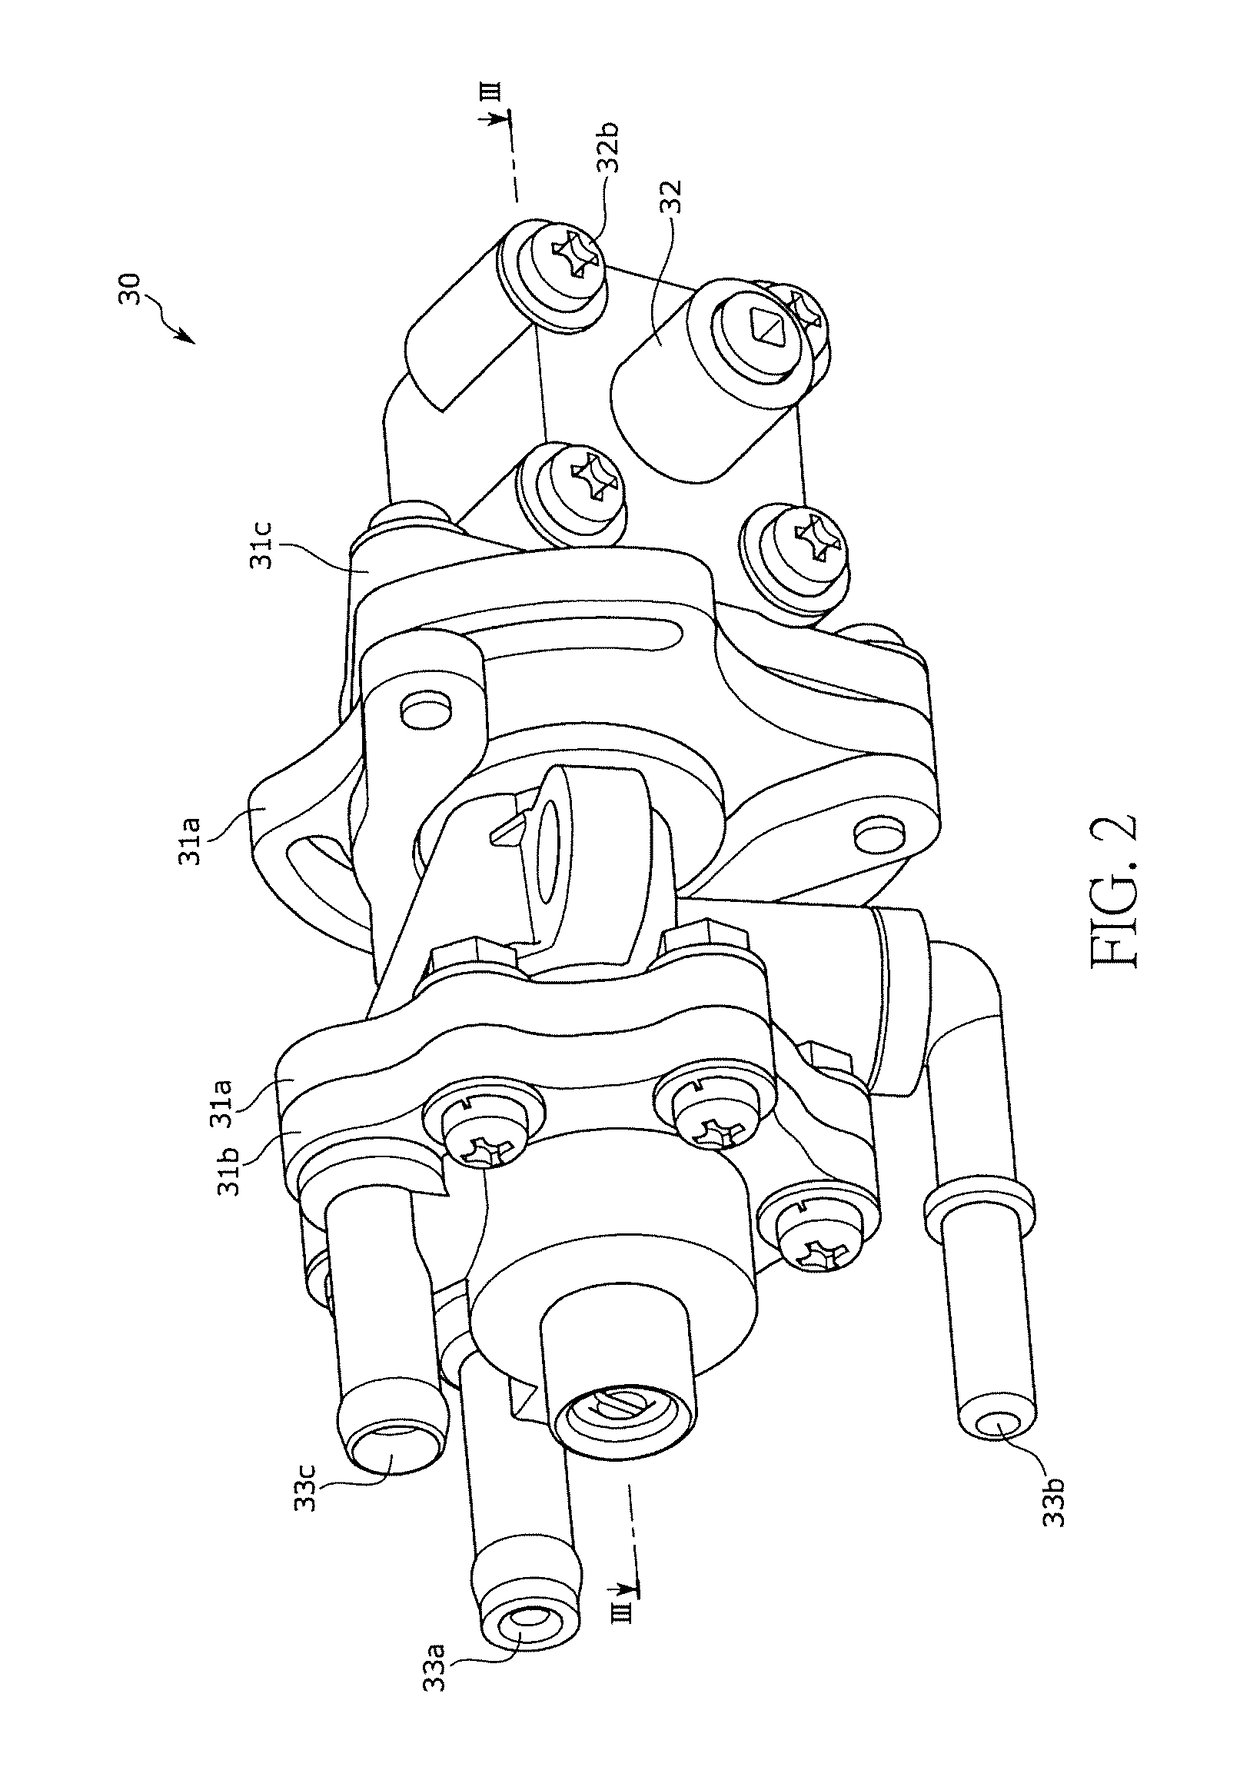 Pump and fuel injection device